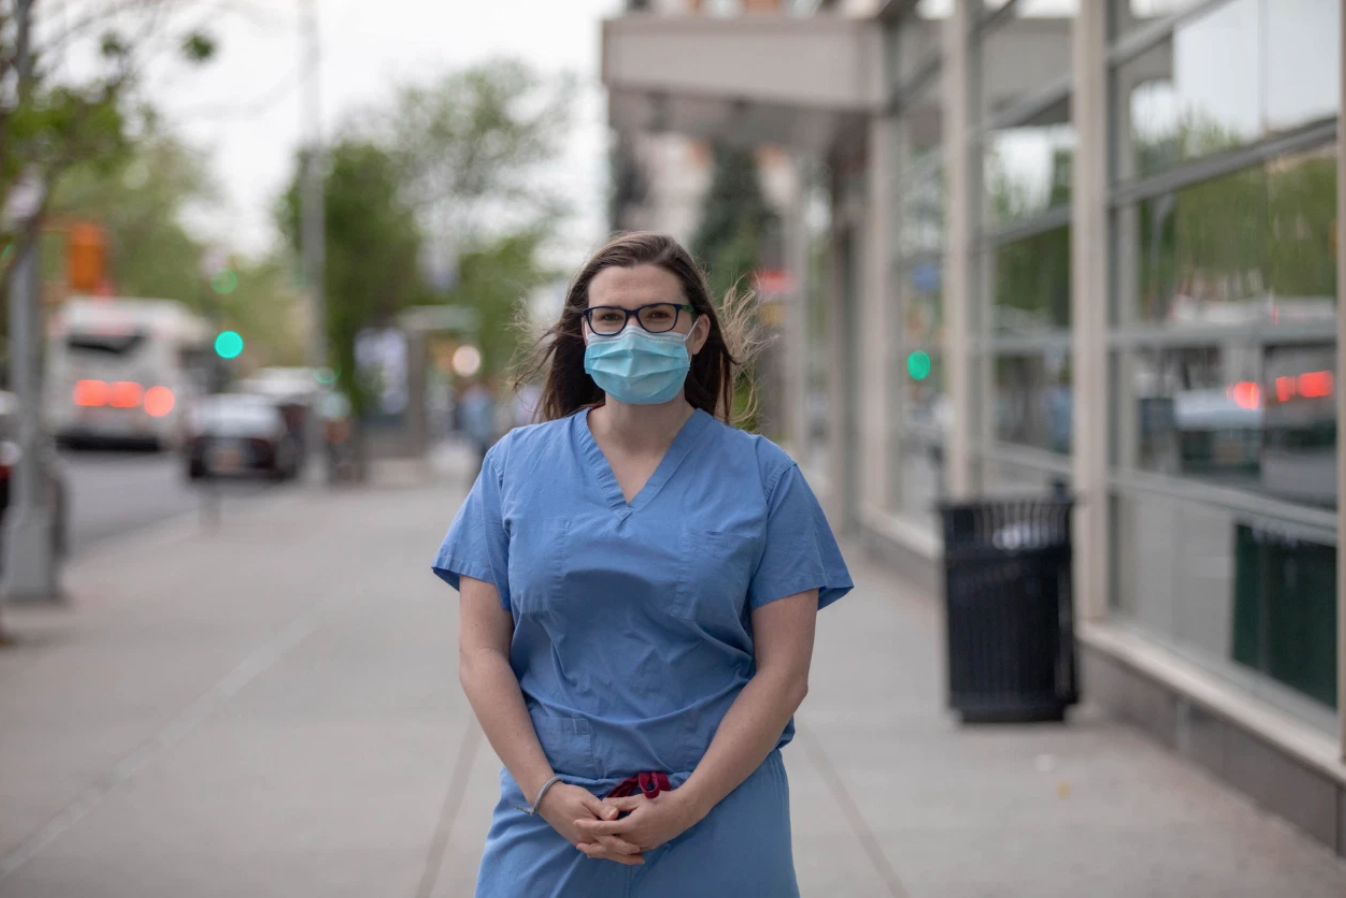 A female resident pictured with mask on outside the hospital